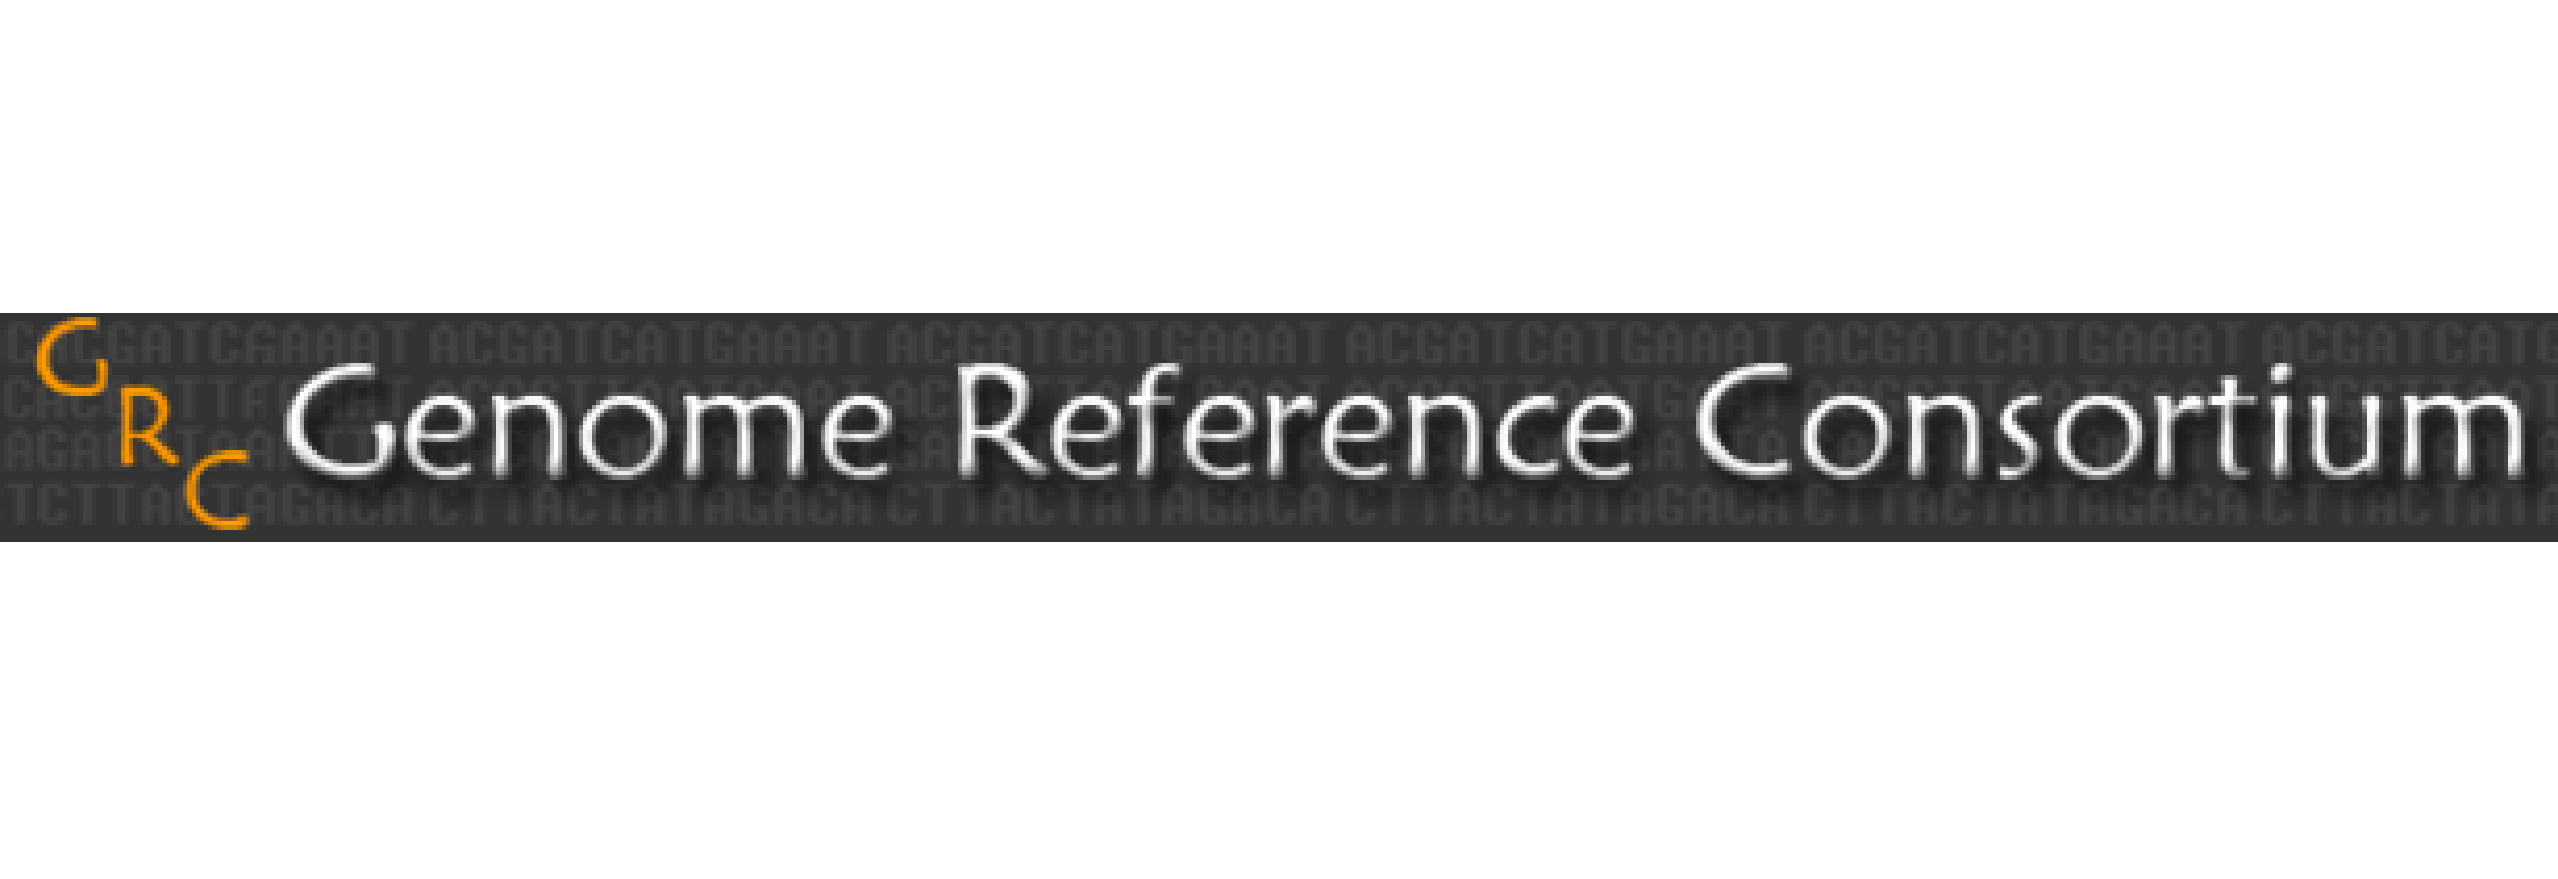 Reference genomes